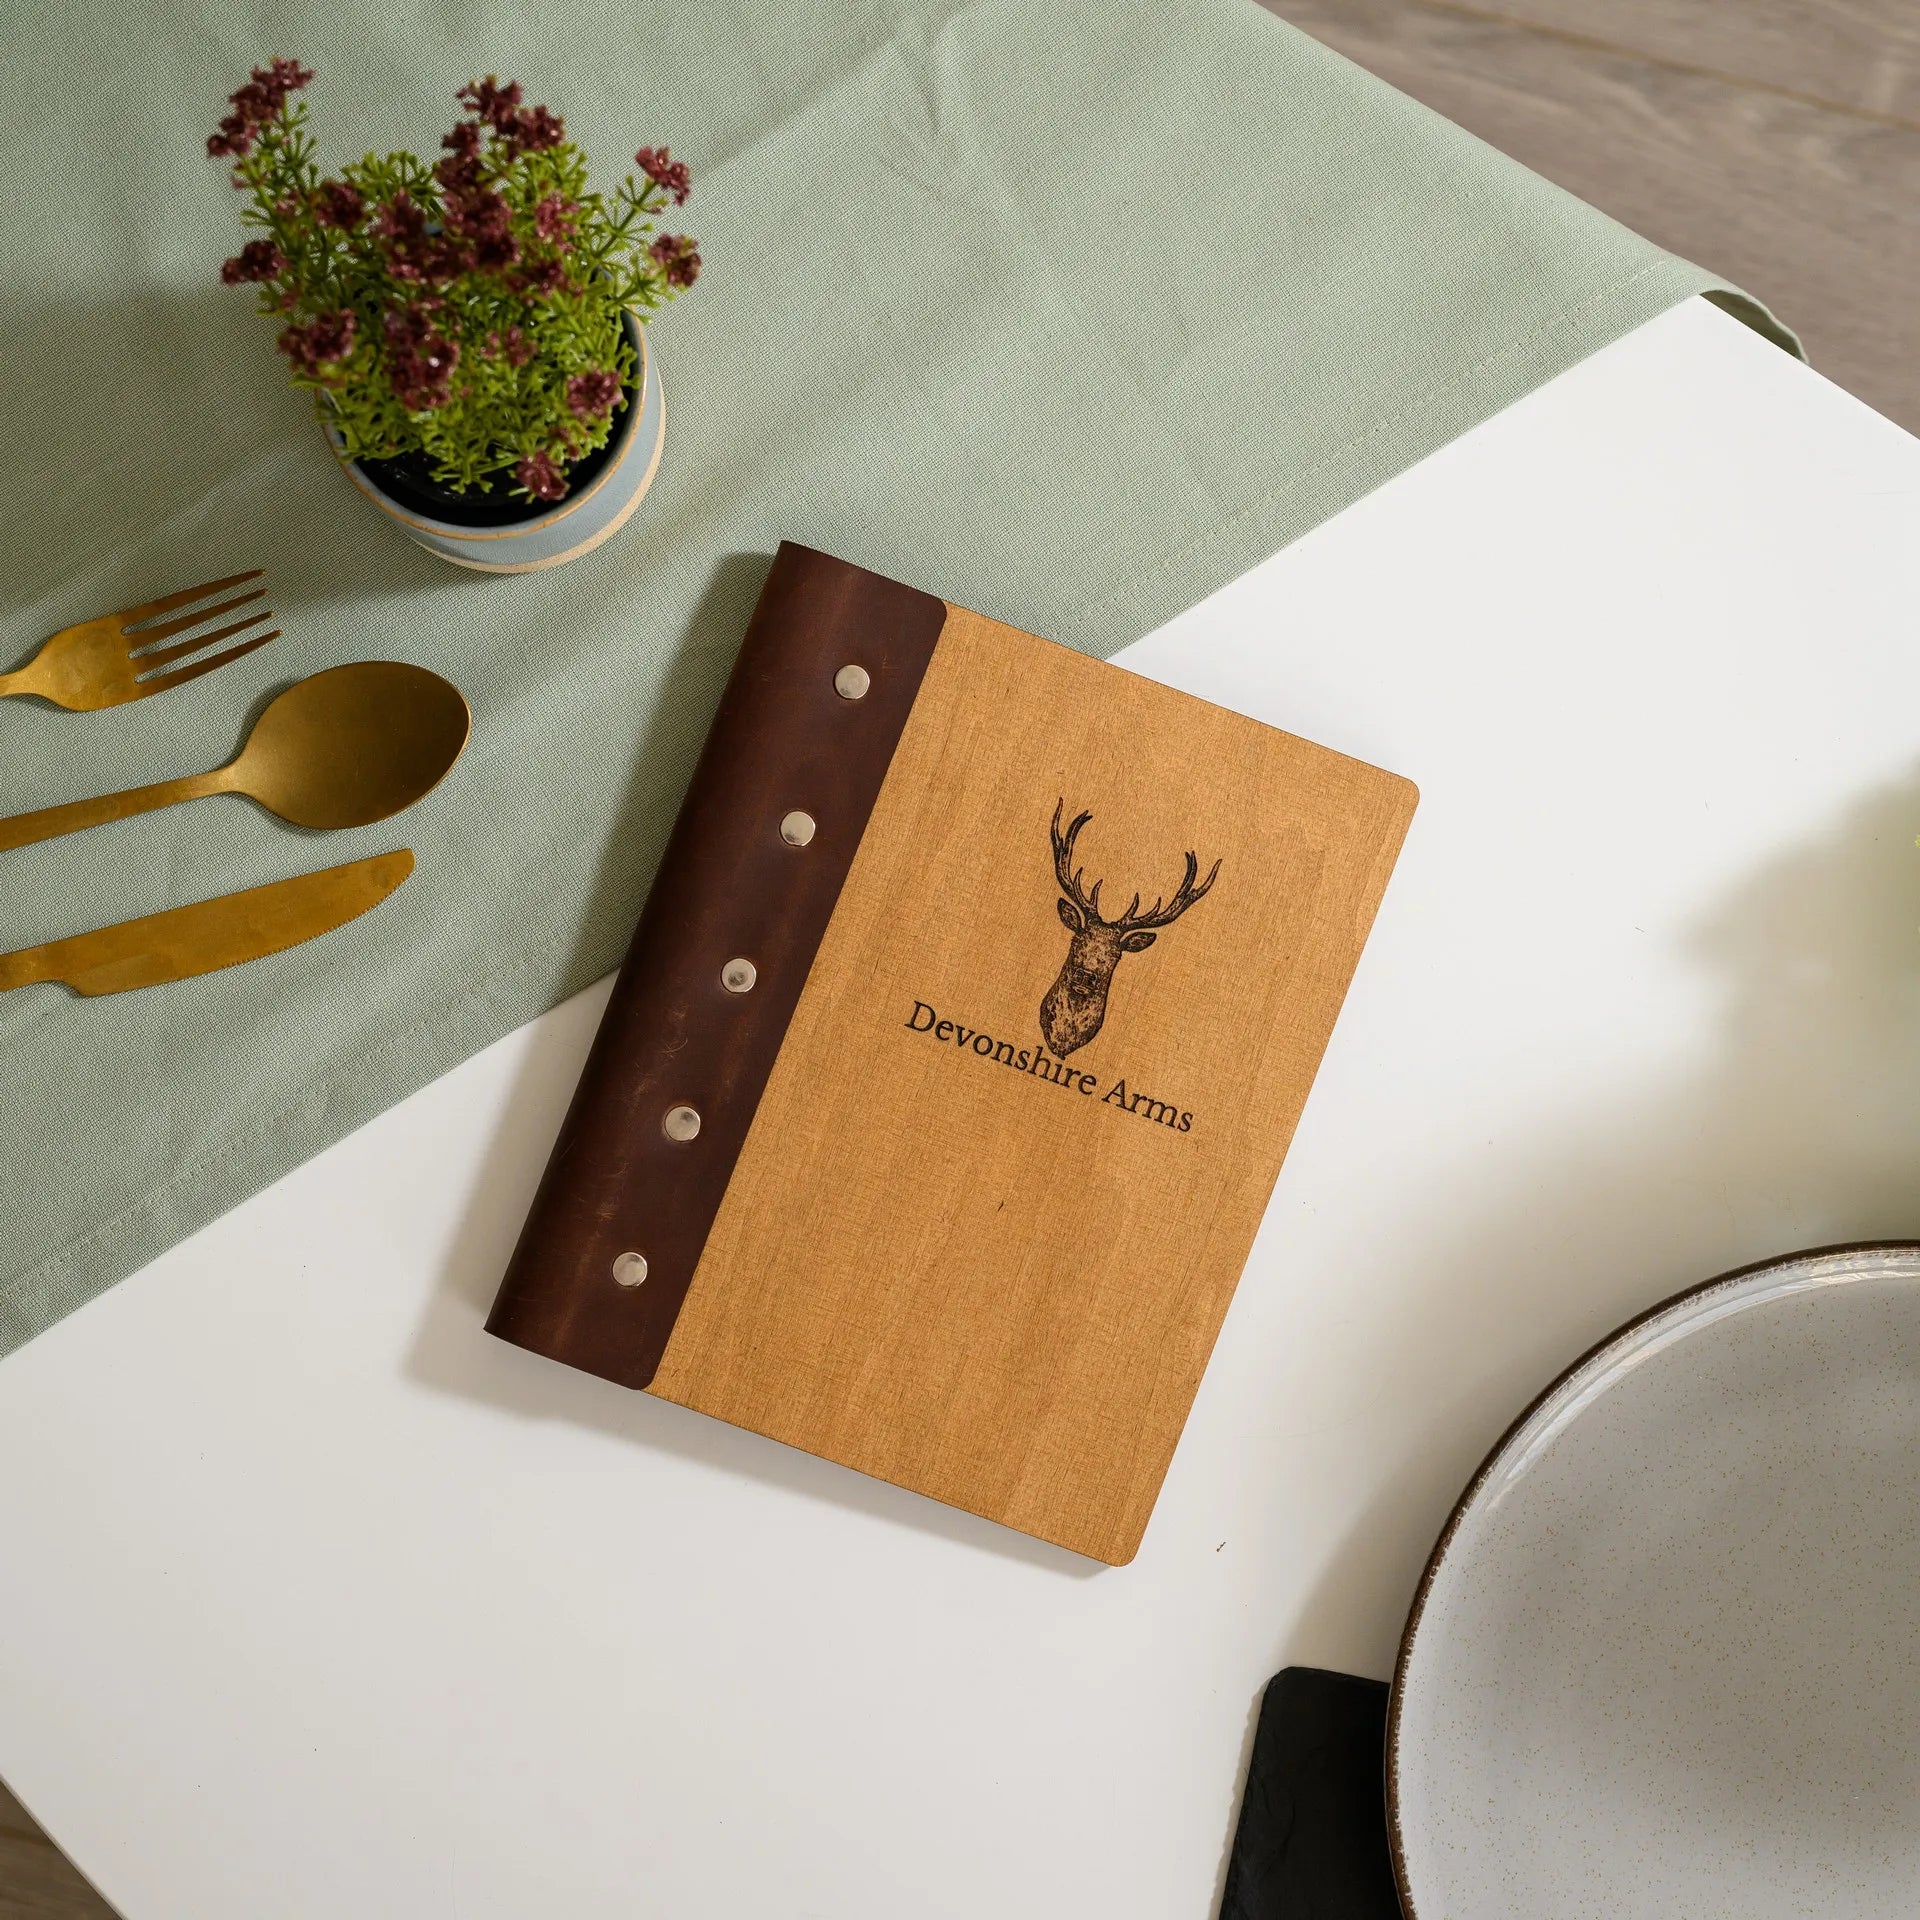 Leather-bound Wooden Menu Folder: Blends rustic charm with durability for an elegant touch.